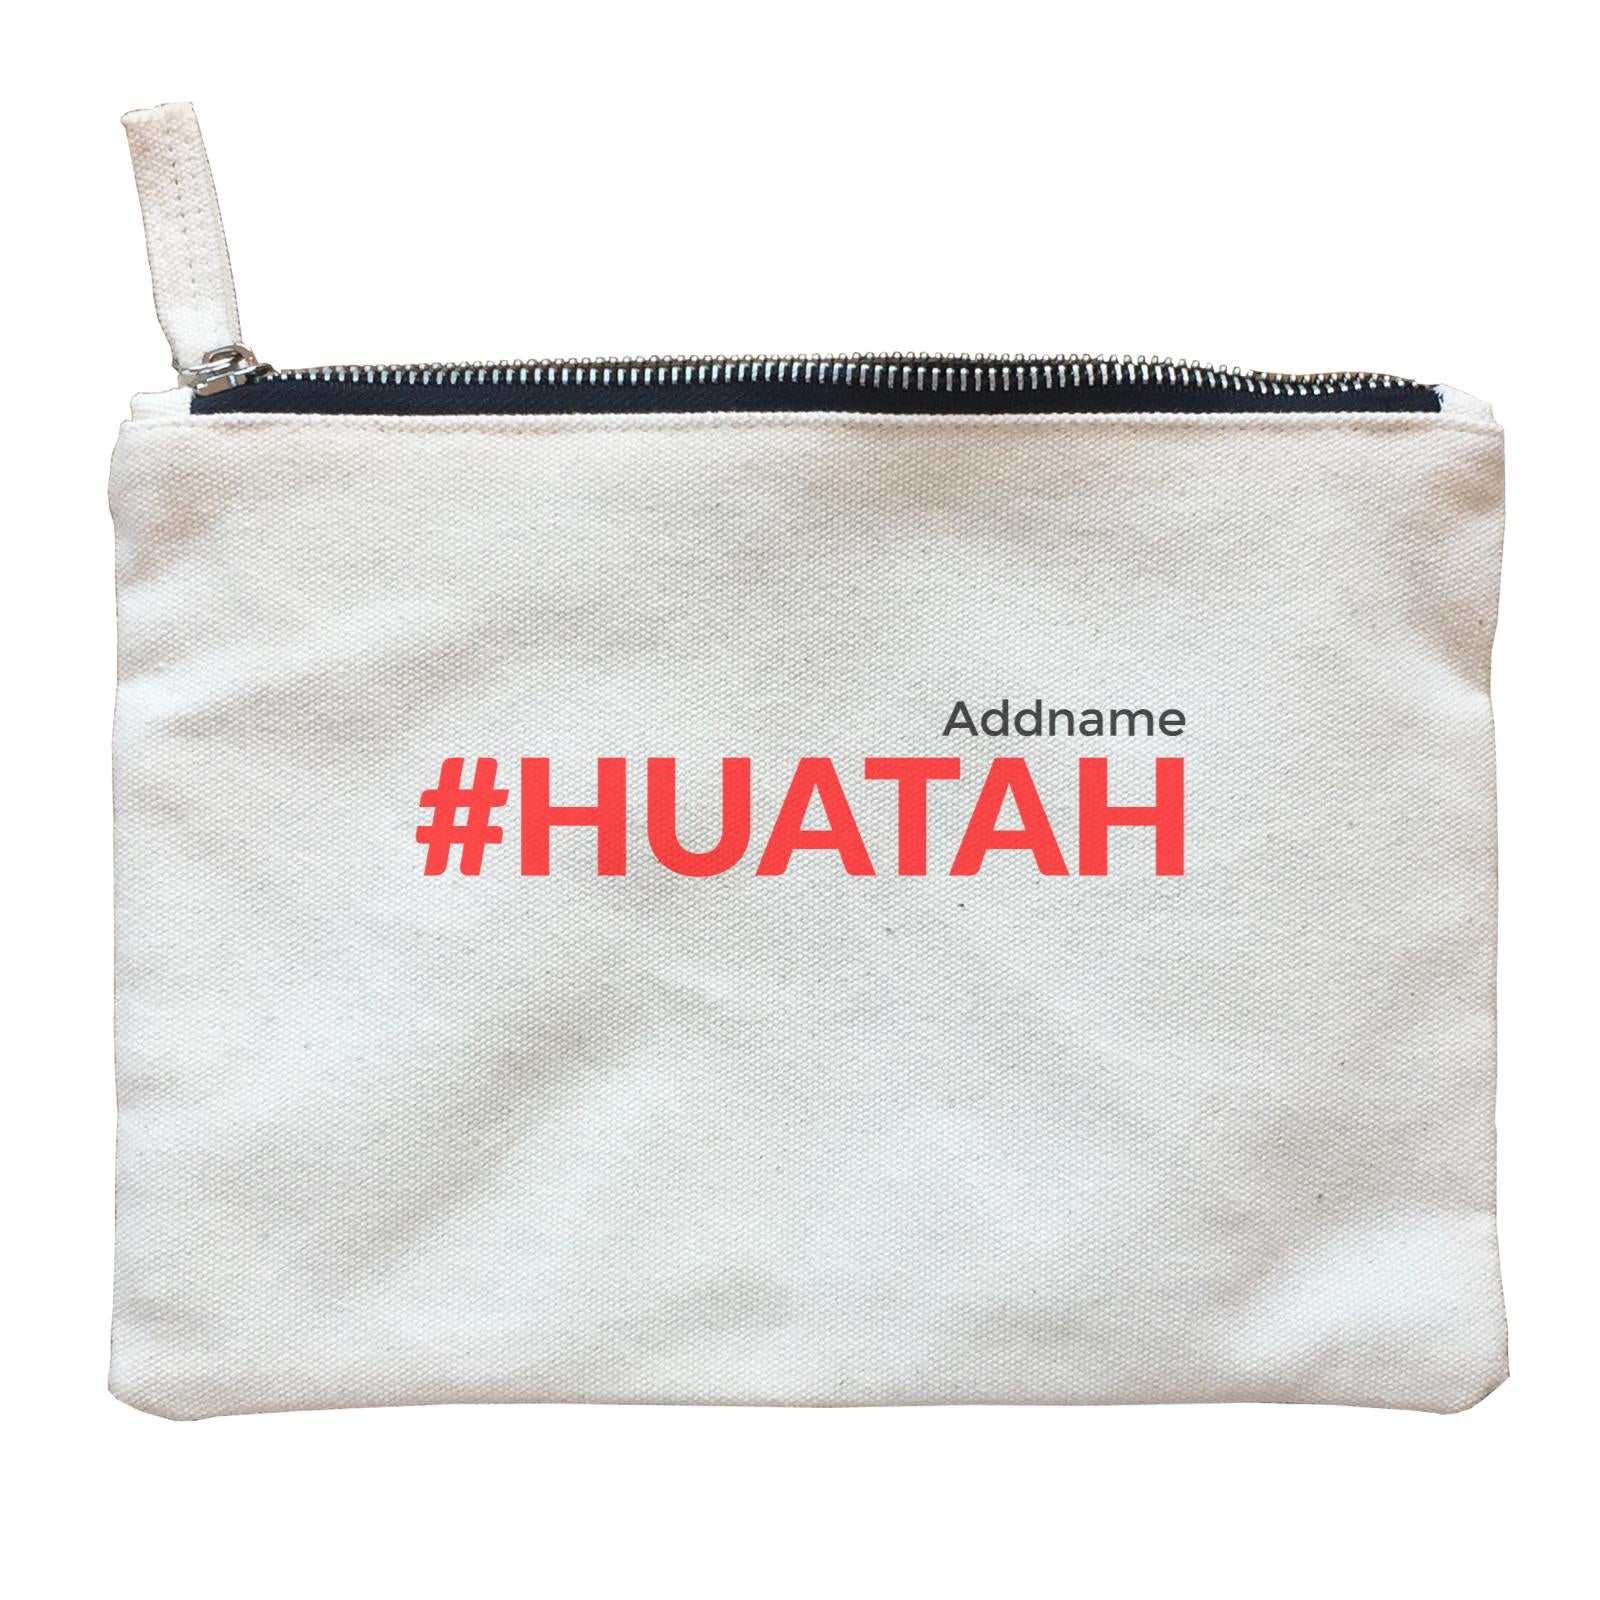 Chinese New Year Hashtag Huatah Accessories Zipper Pouch